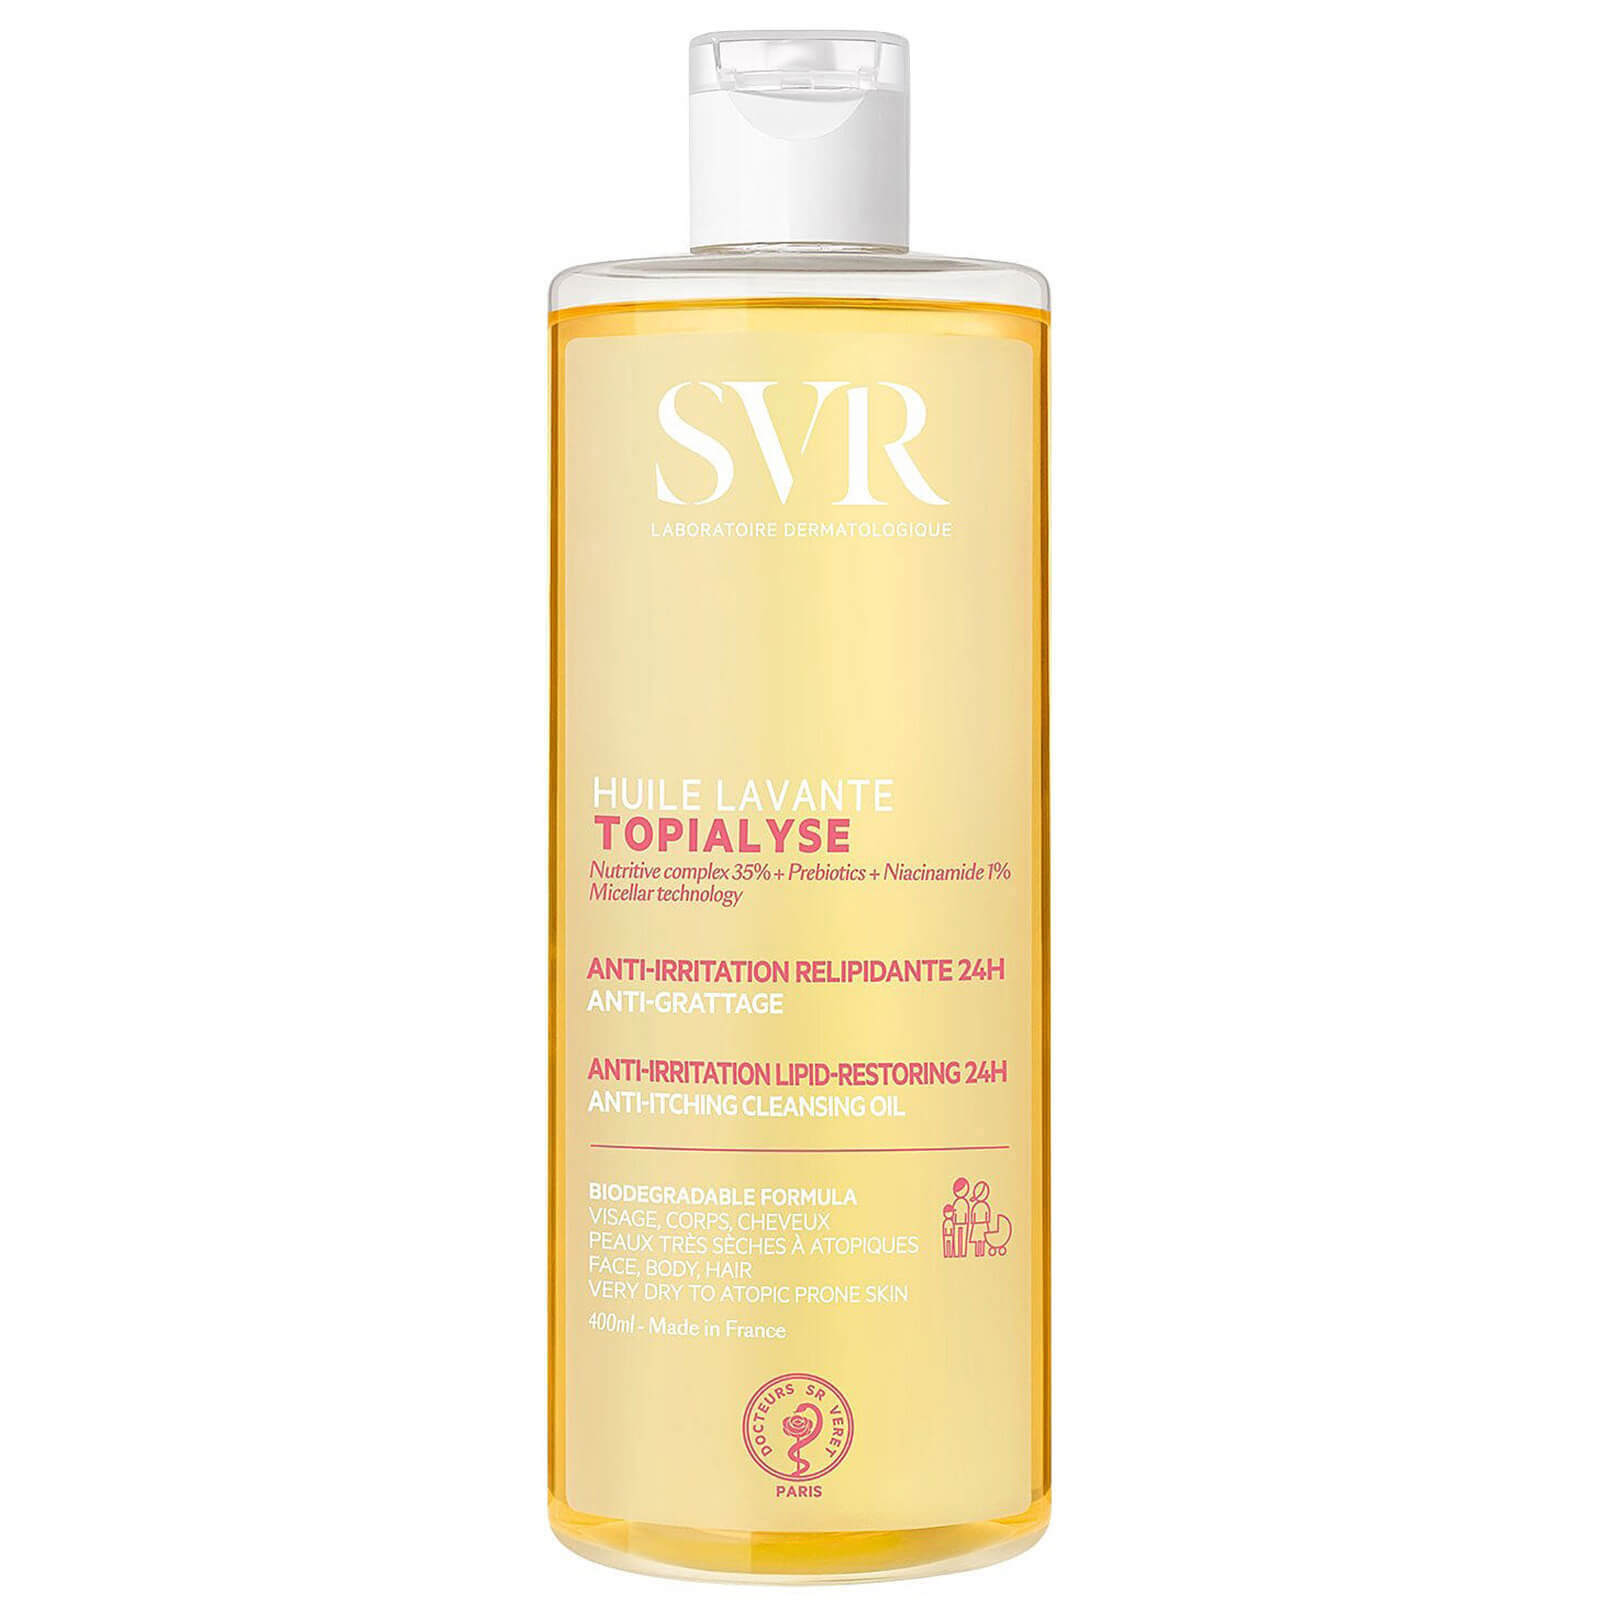 Photos - Cream / Lotion SVR Topialyse Face and Body Emulsifying Micellar Oil Wash 400ml 1002017